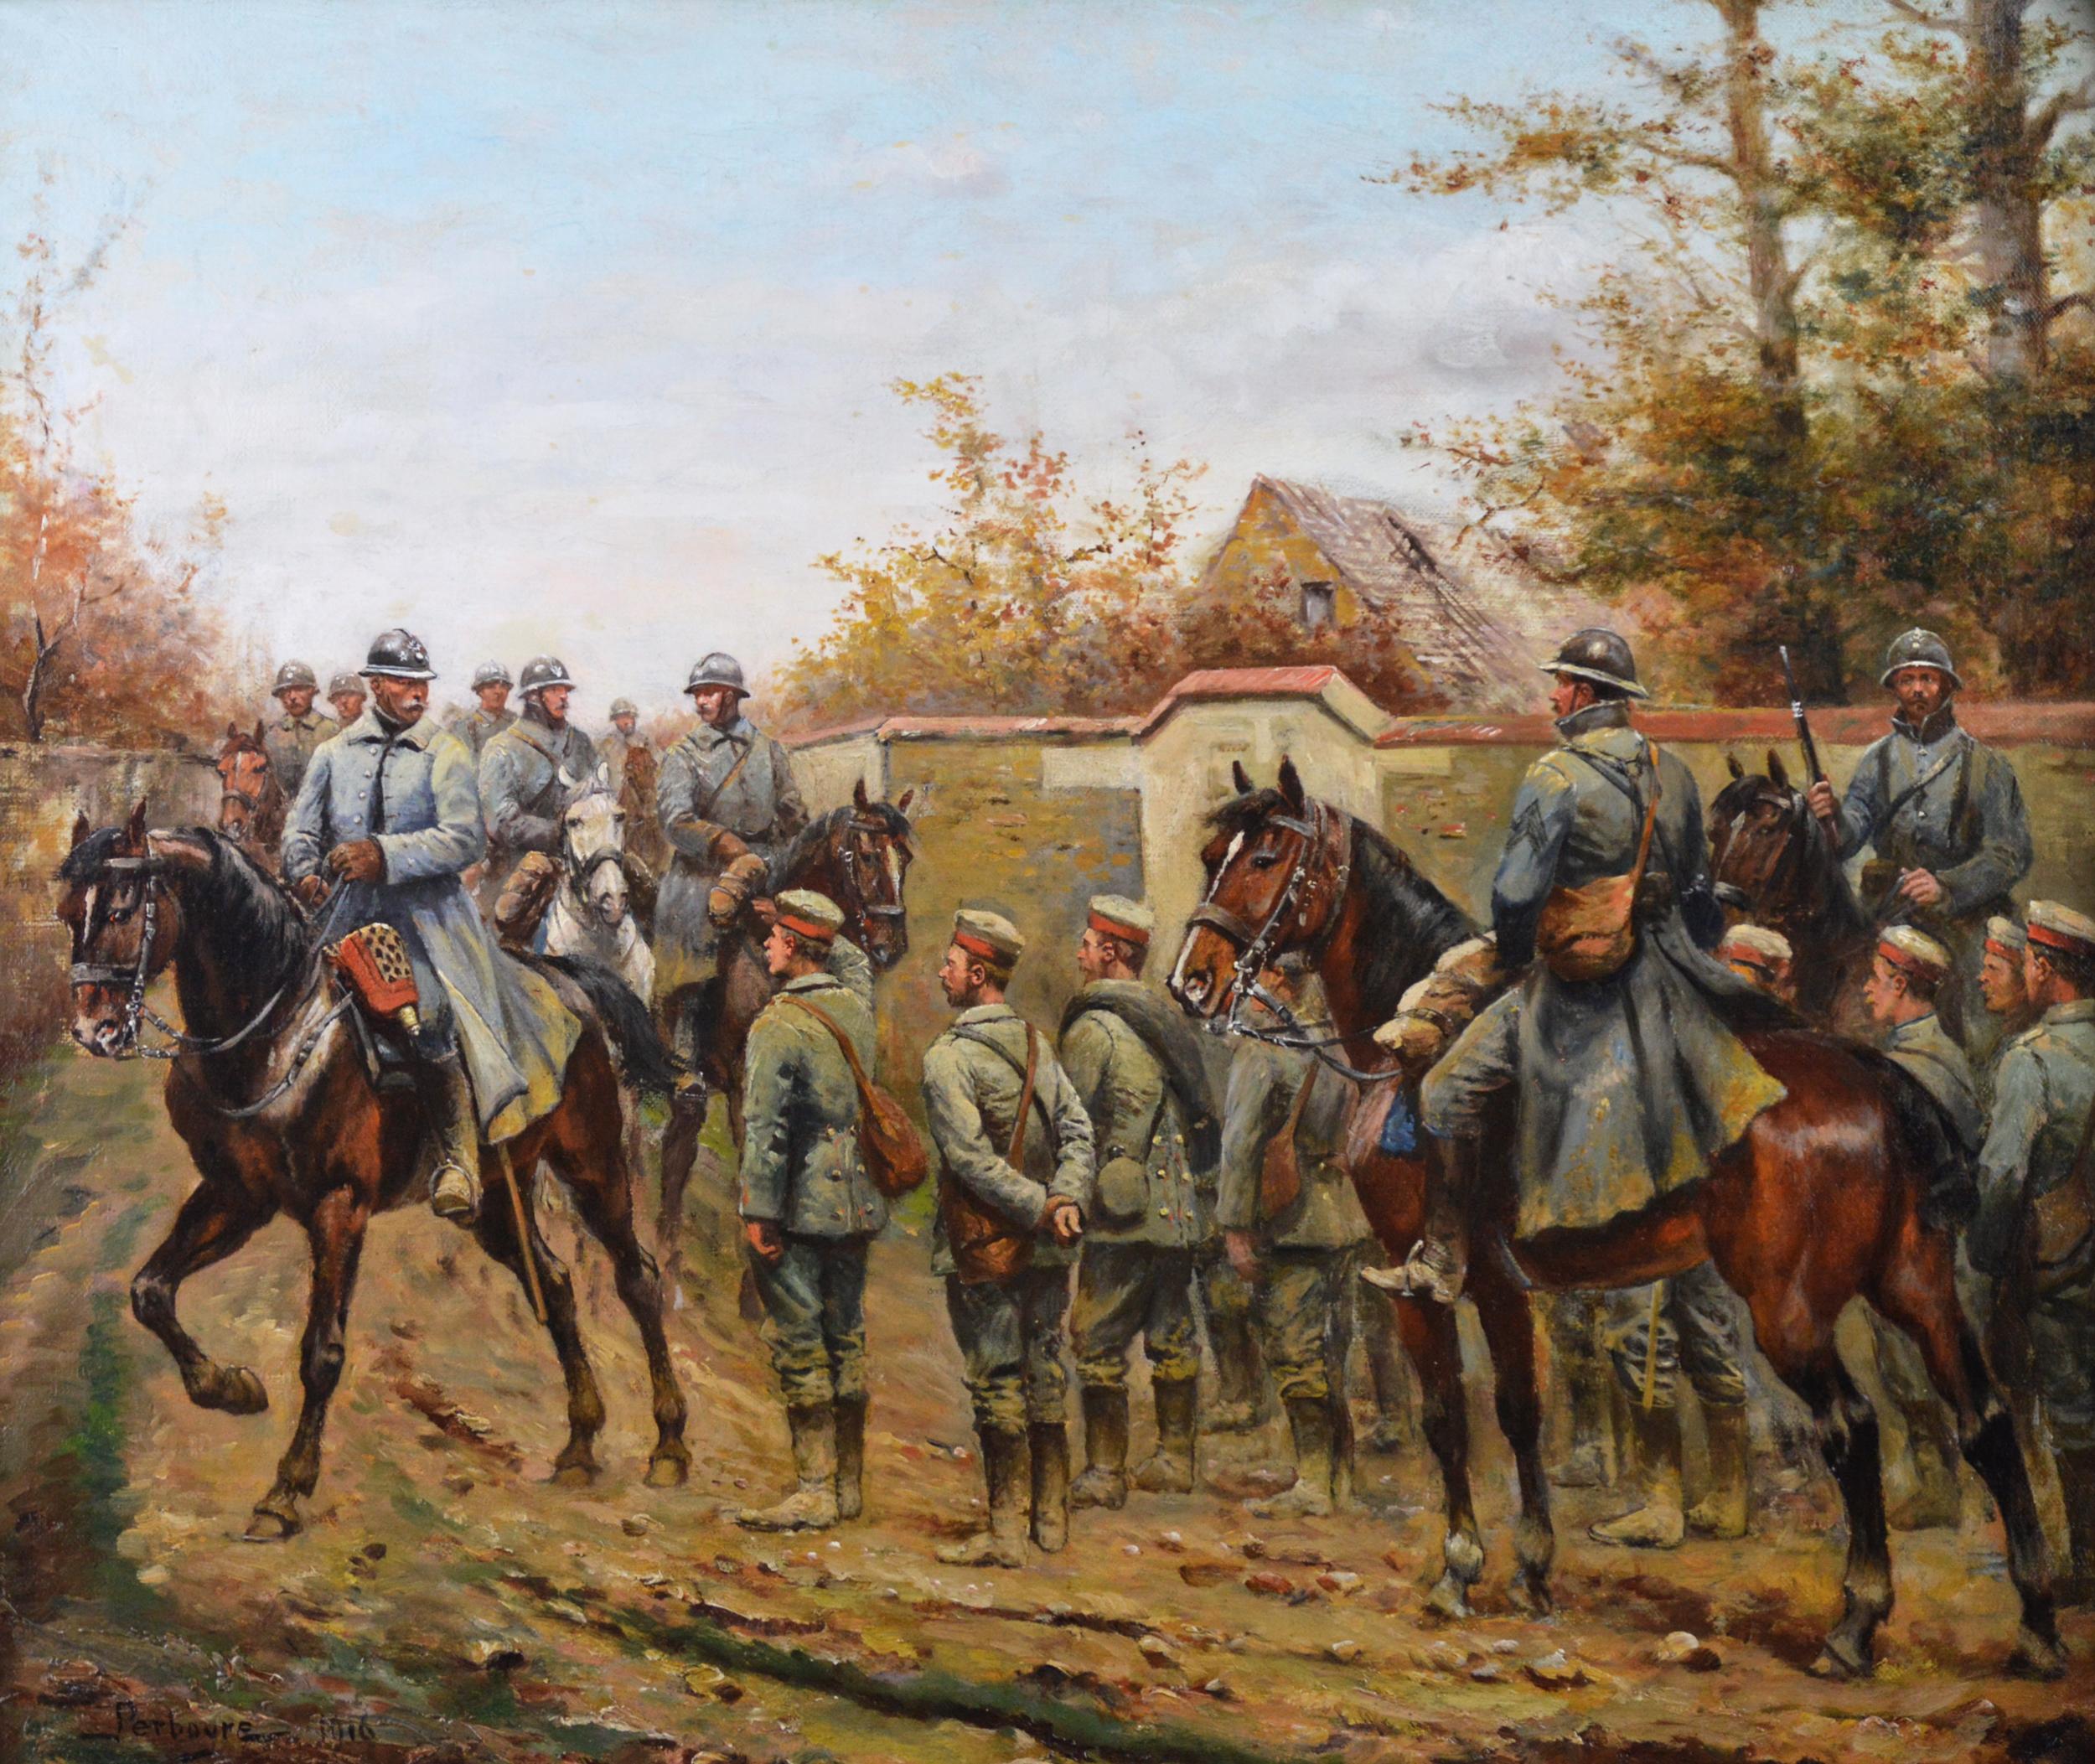 Military WW1 oil painting of French & German Soldiers  - Painting by Paul Emile Léon Perboyre